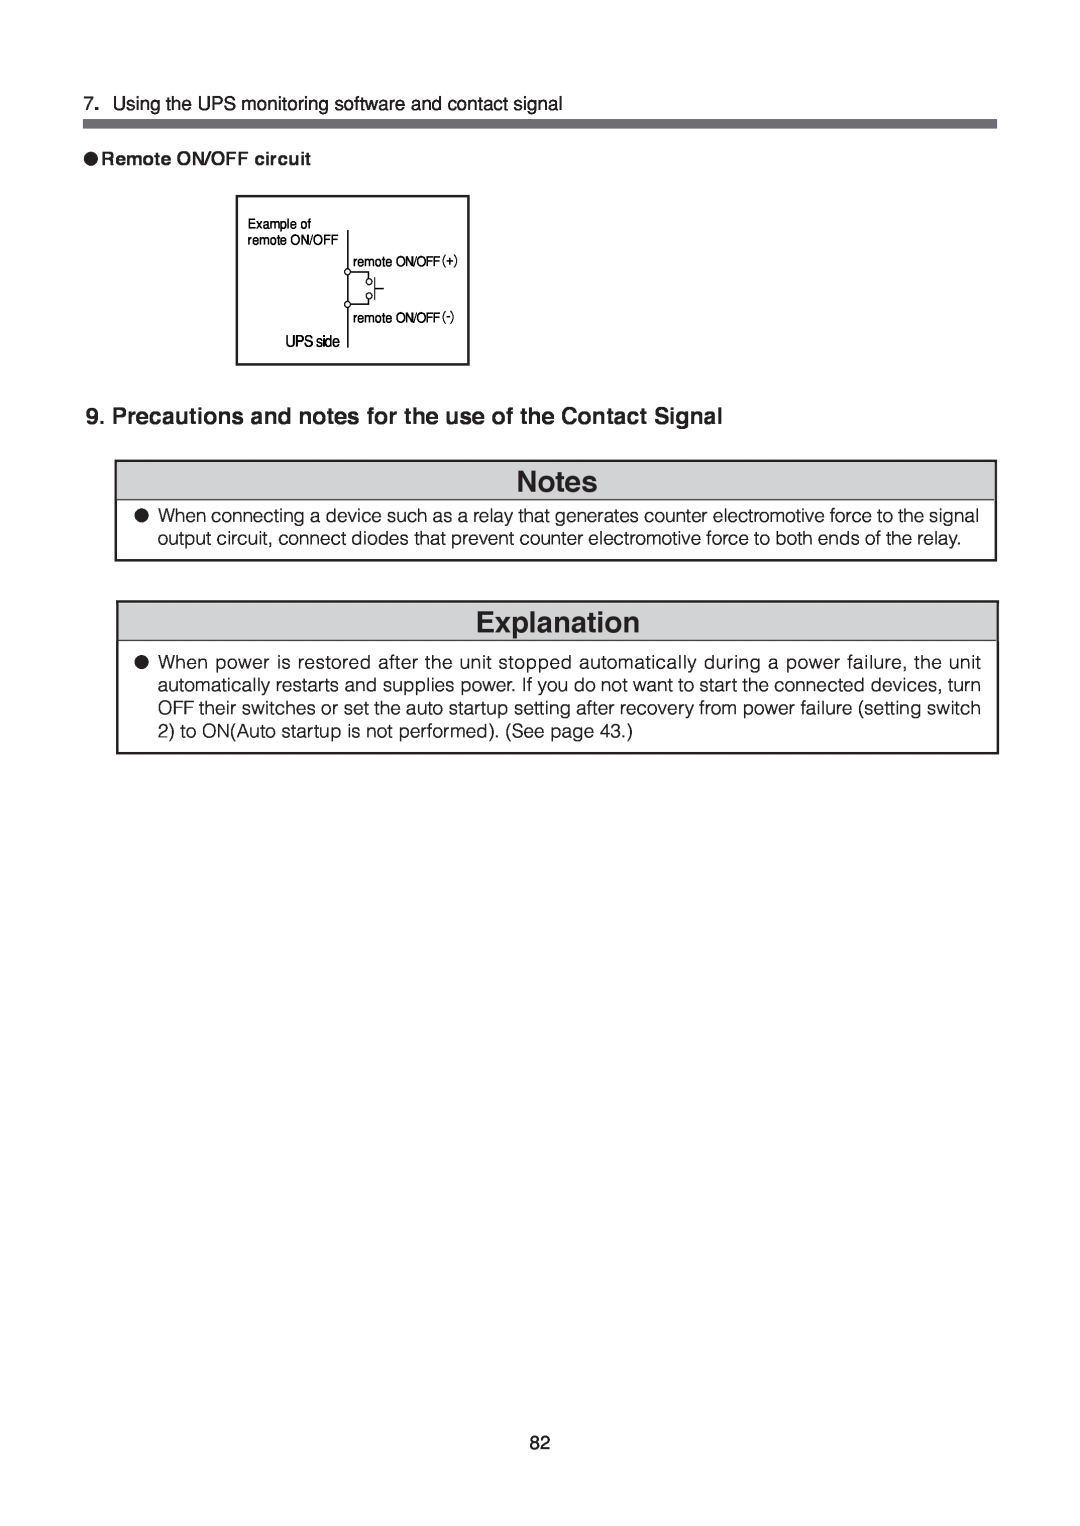 Omron BU3002SW, BU1002SW Explanation, Precautions and notes for the use of the Contact Signal, Remote ON/OFF circuit 